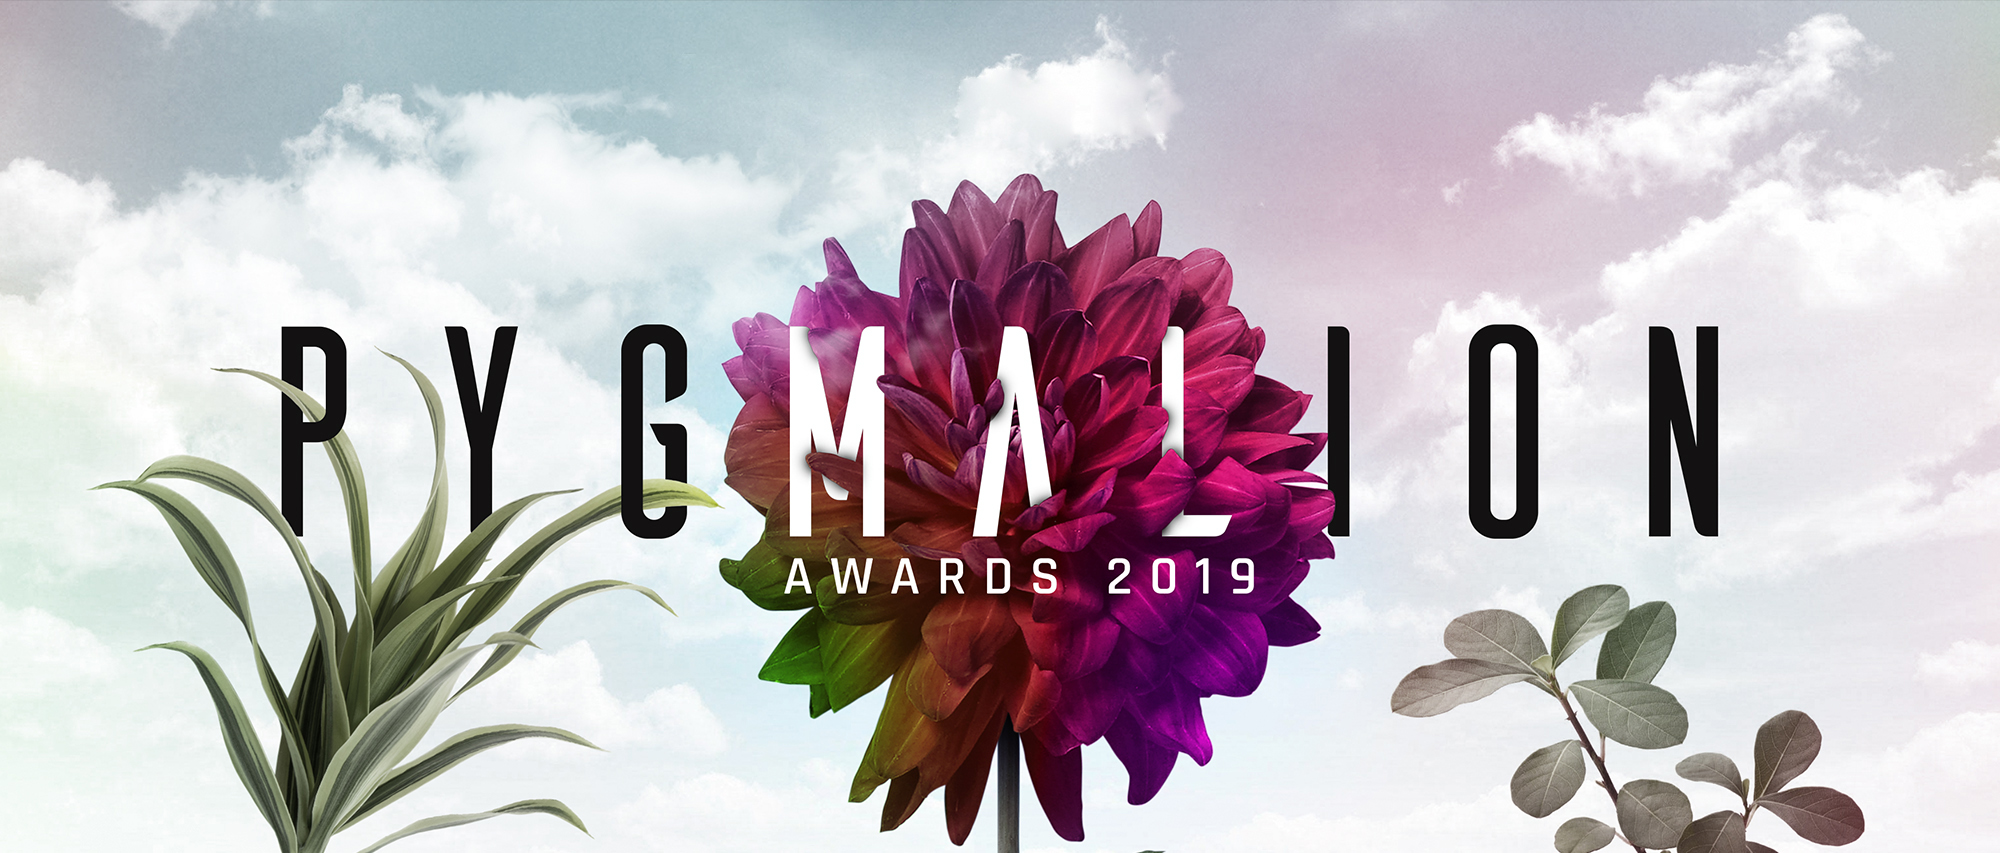 PYGMALION 2019 Call for Entries